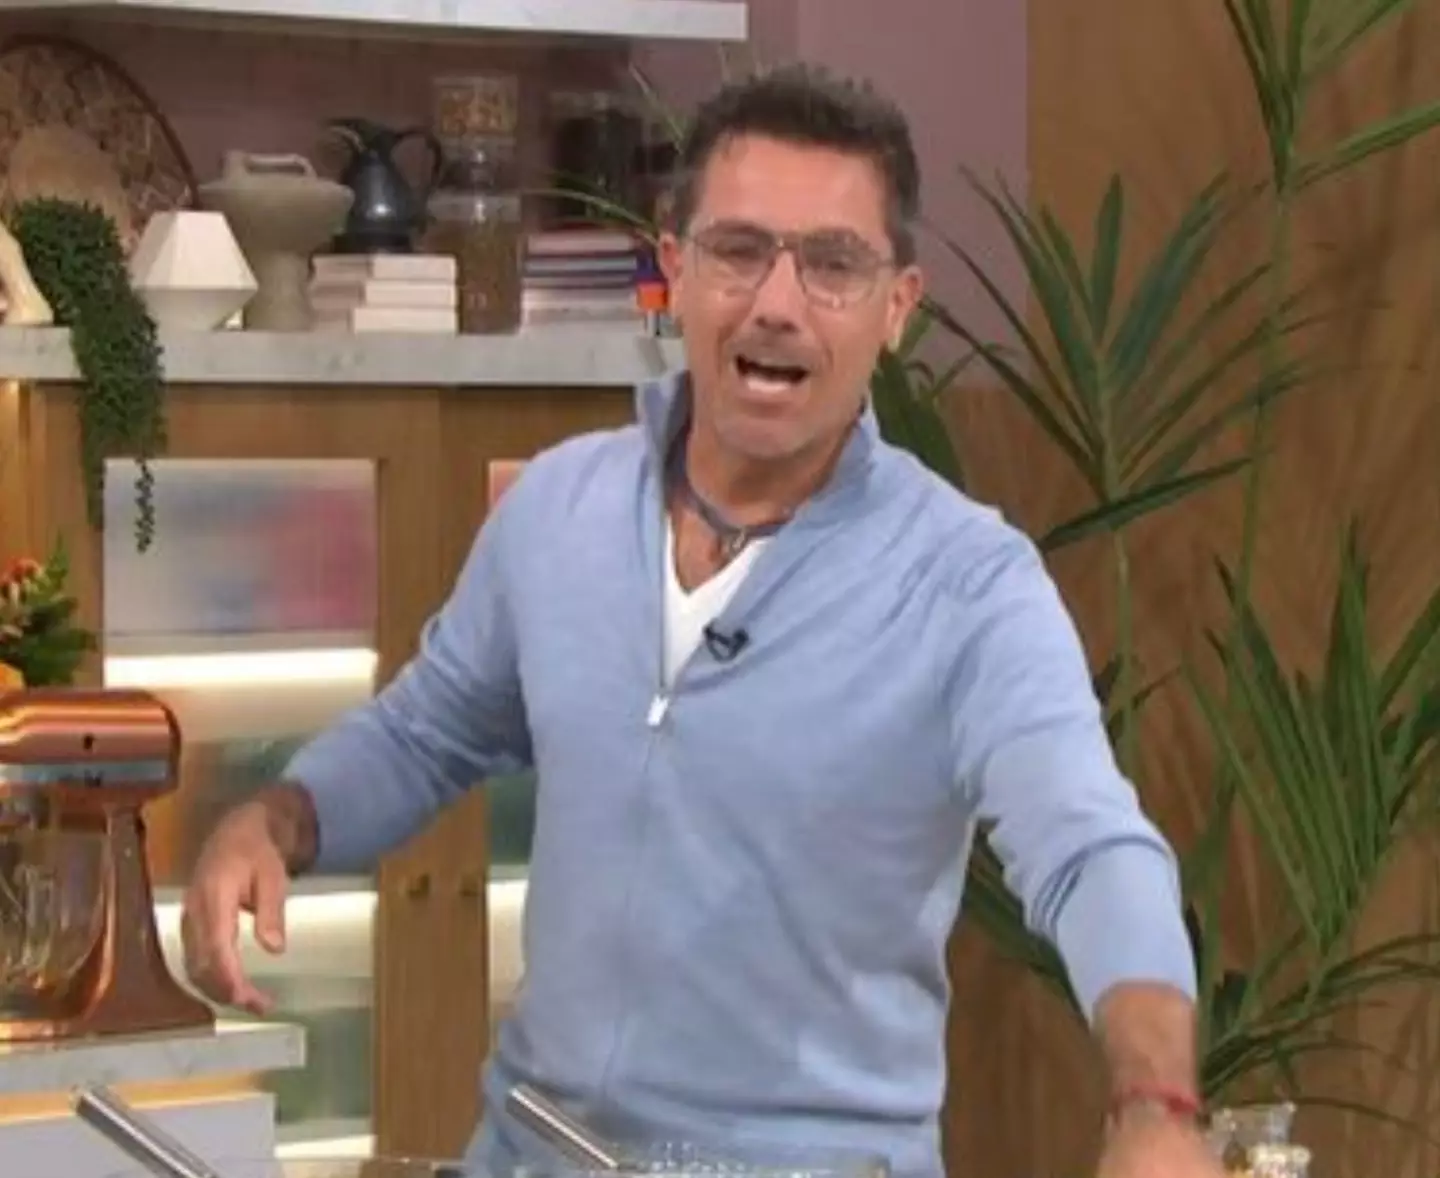 Gino D'Acampo is often making cheeky comments on TV.